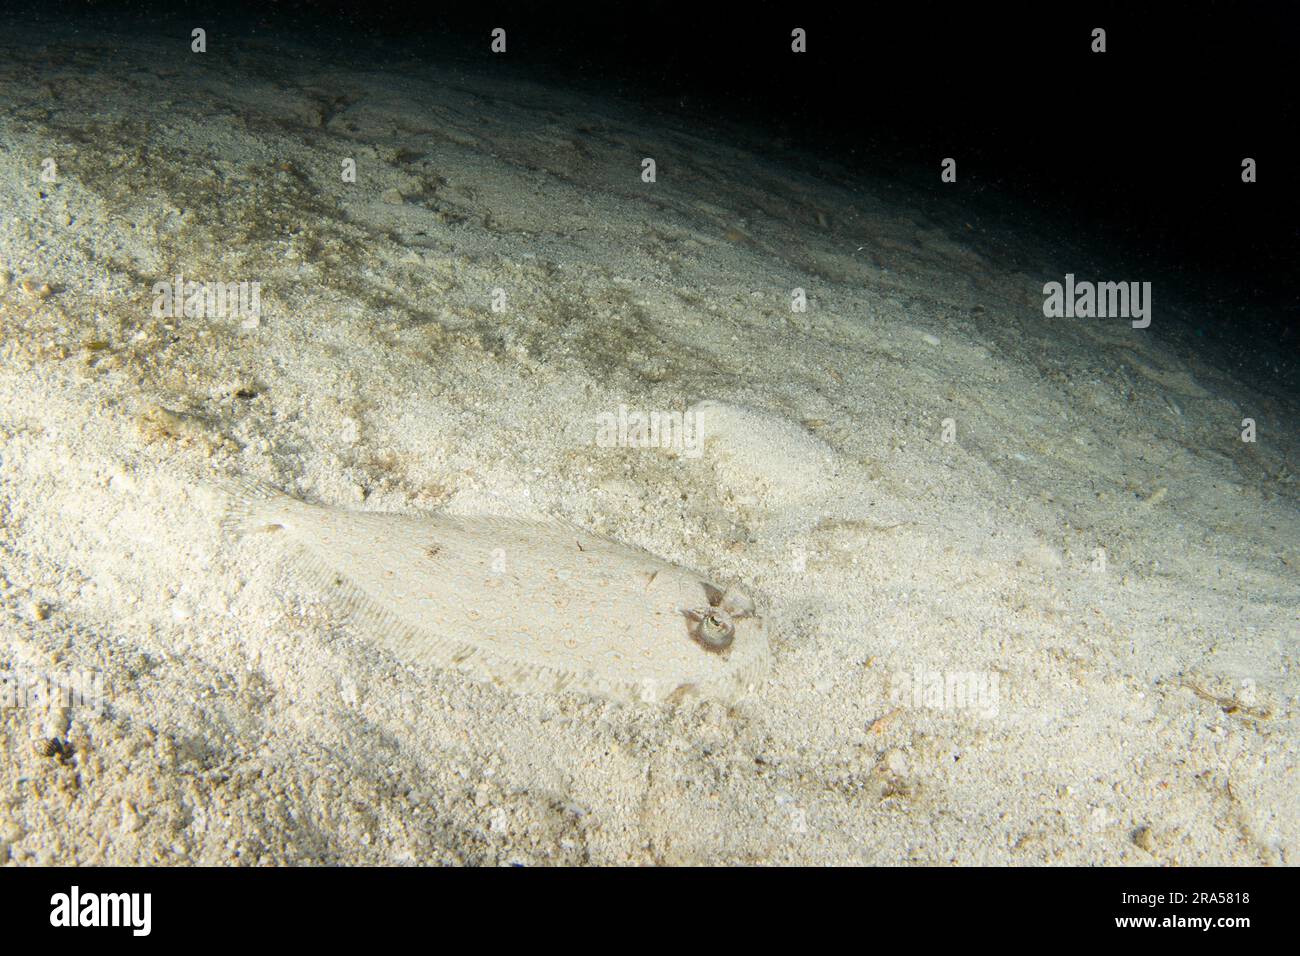 Peacock flounder during night dive in Raja Ampat. Bothus mancus is hiding on the sea bed. Flounder on the bottom. Flat fish on sand. Stock Photo